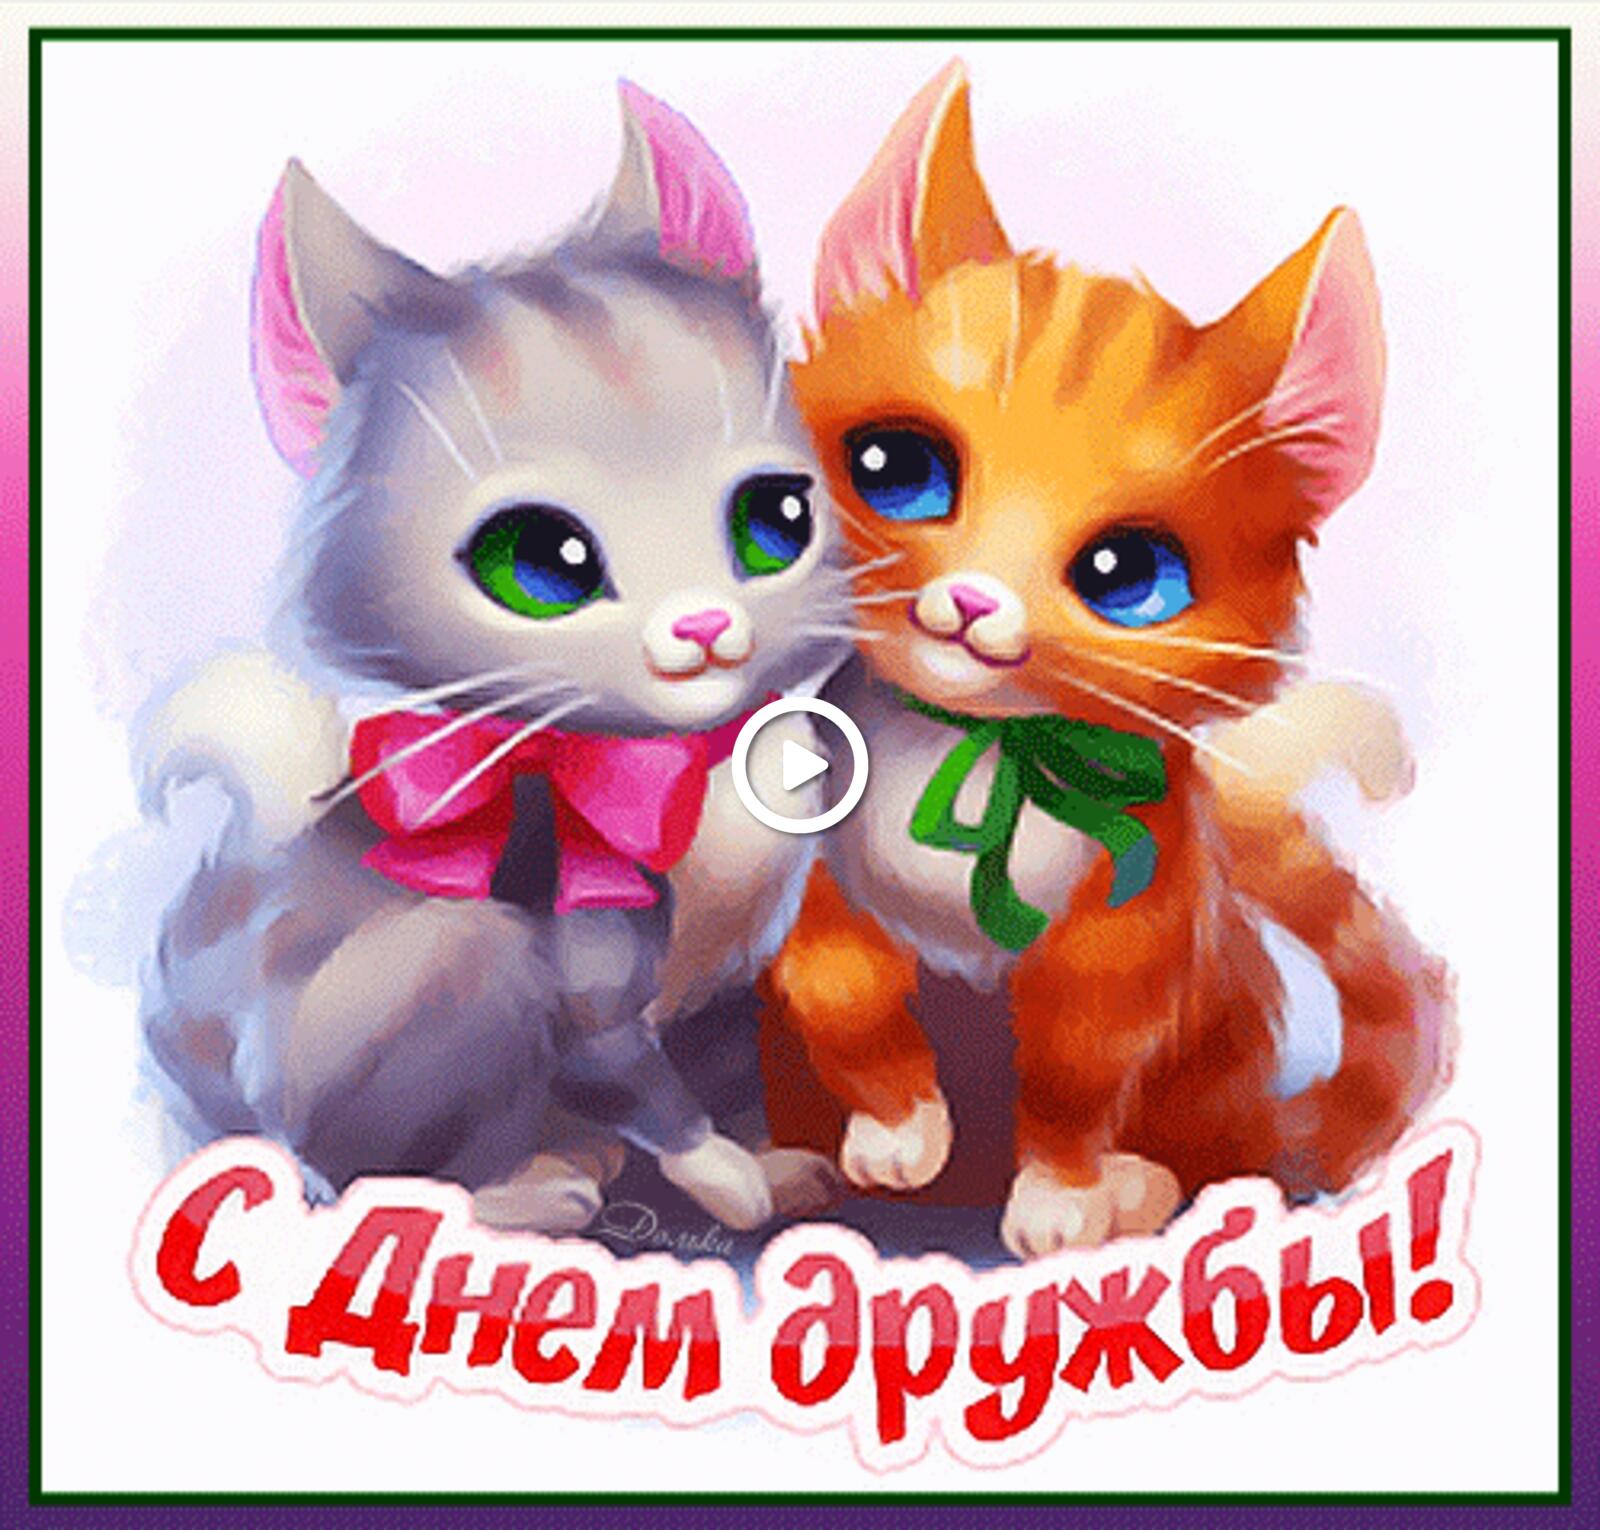 happy friendship day friend`s day cards kittens